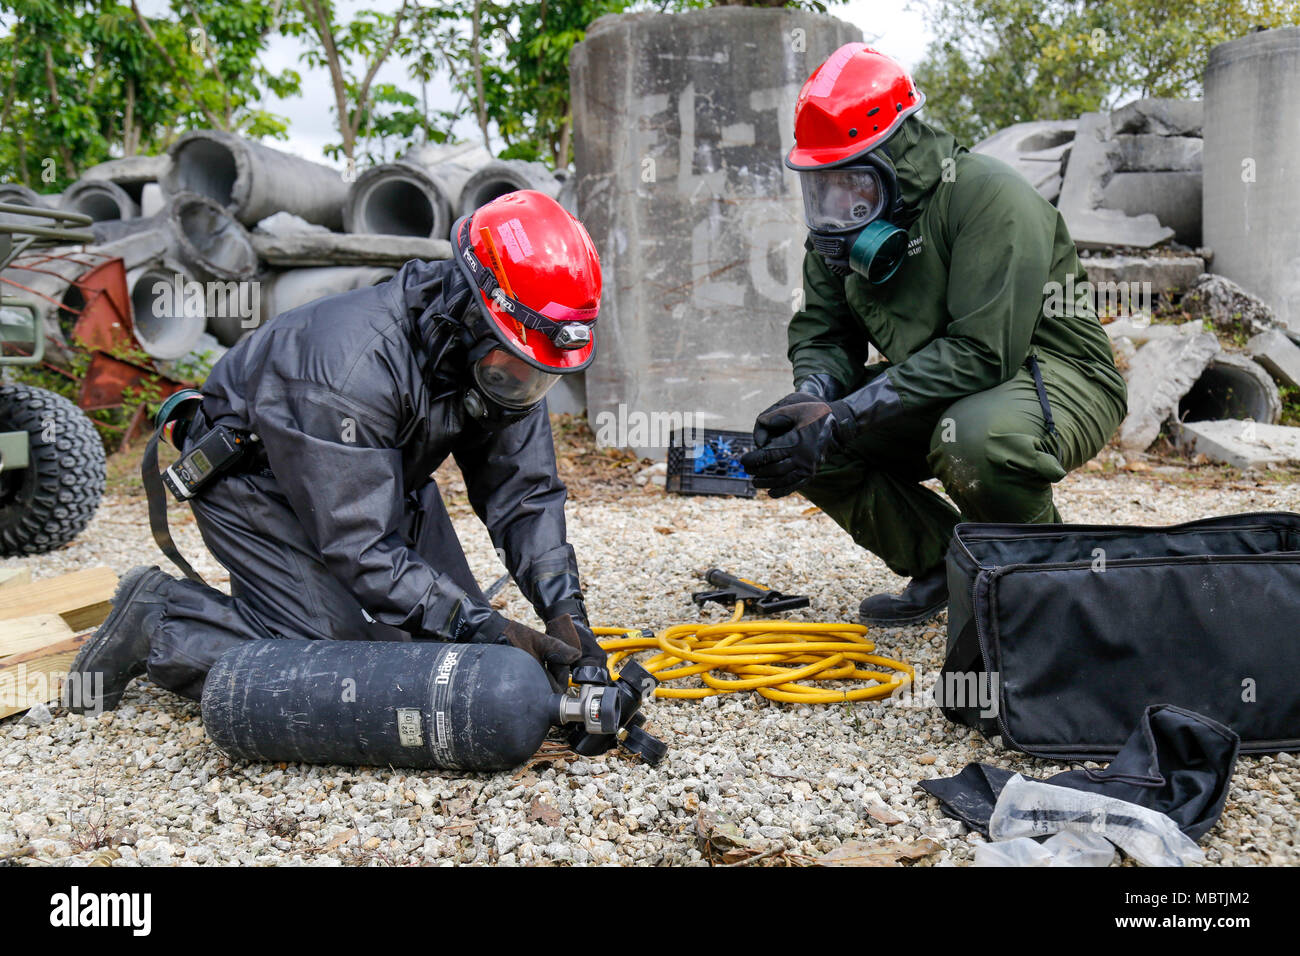 U. S. Army Reserve Soldiers assigned to 424th engineer Company prepares a compressed air tank in a Joint Training Exercise on the Miami-Dade Fire Rescue Urban Search and Rescue Training Site in Miami, Fla. Jan. 10, 2018. This JTE focused on building response capabilities and seamless transition between the local first responders and the follow-on support provided by the National Guard and Active duty soldiers. (U. S. Army Photo by Spc. Andrea Salgado Rivera) Stock Photo